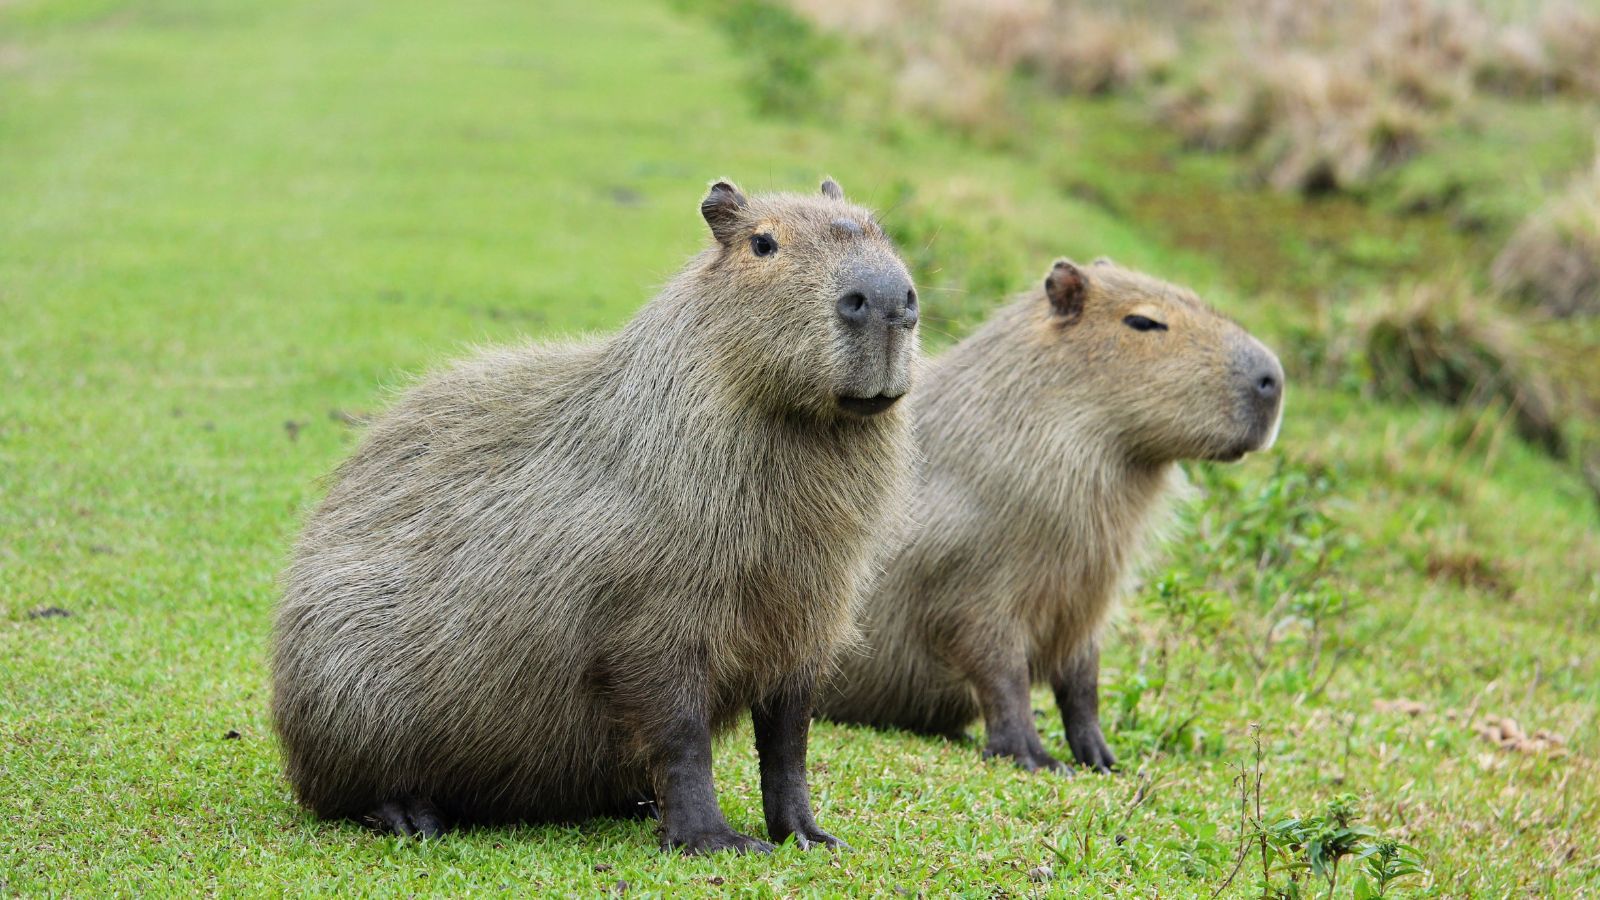 <p><span>These social rodents are the largest in the world and native to South America. They’re known for their sociable nature and interspecies friendships, and are often seen interacting peacefully with both other animals and humans. Some people even keep capybaras as pets. Not to mention, they’re absolutely adorable!</span></p>